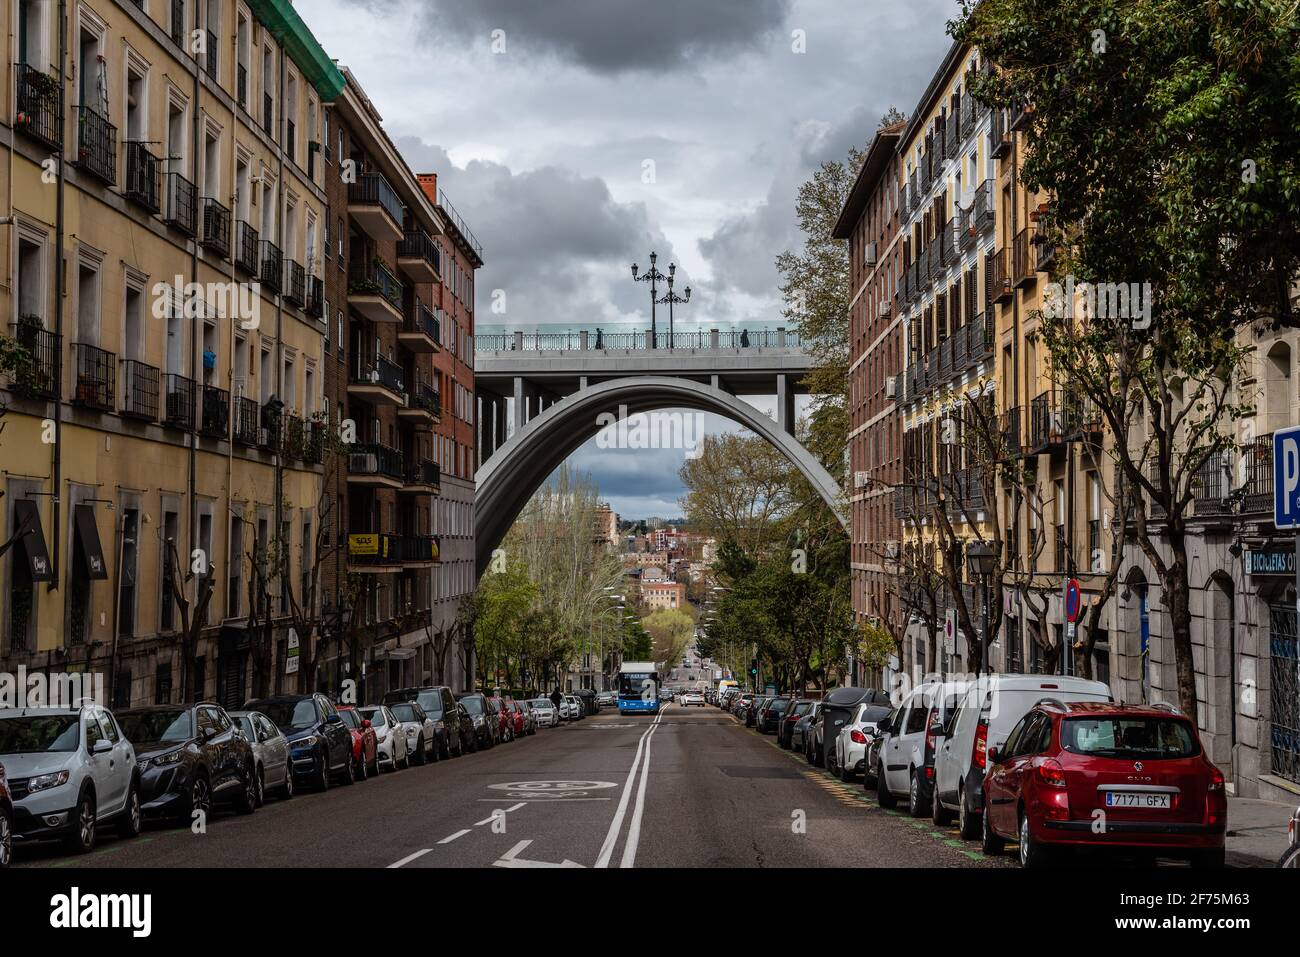 Madrid, Spain - April, 2, 2021: Scenic view of Segovia Viaduct in Central Madrid a cloudy day during Easter Week Stock Photo